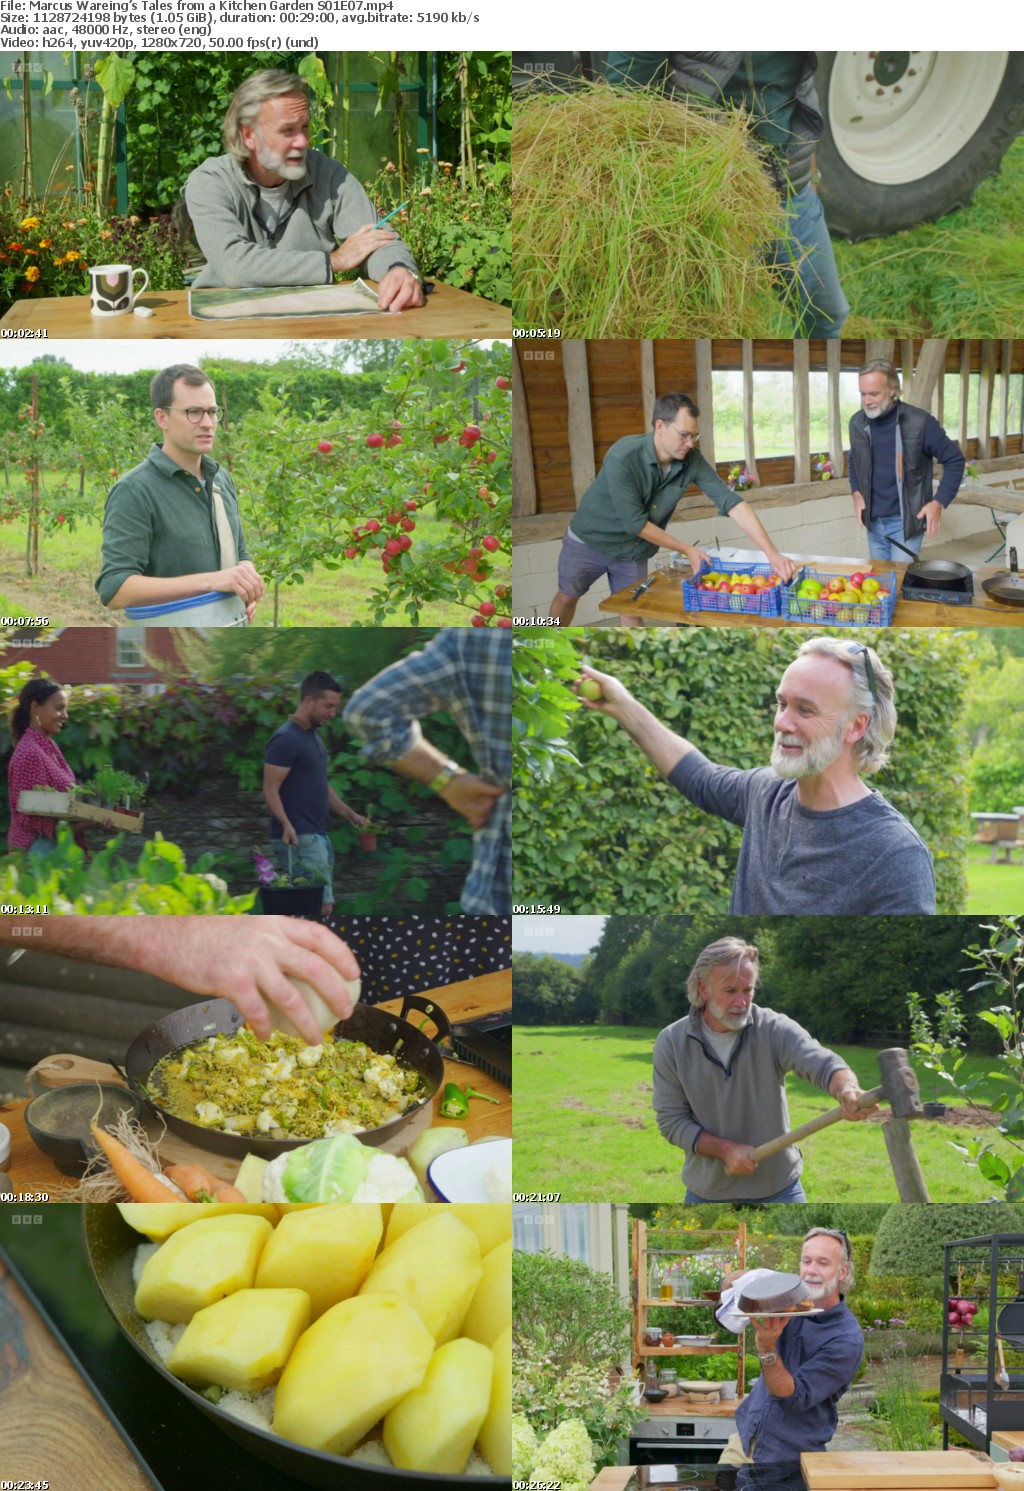 Marcus Wareings Tales from a Kitchen Garden S01E07 (1280x720p HD, 50fps, soft Eng subs)